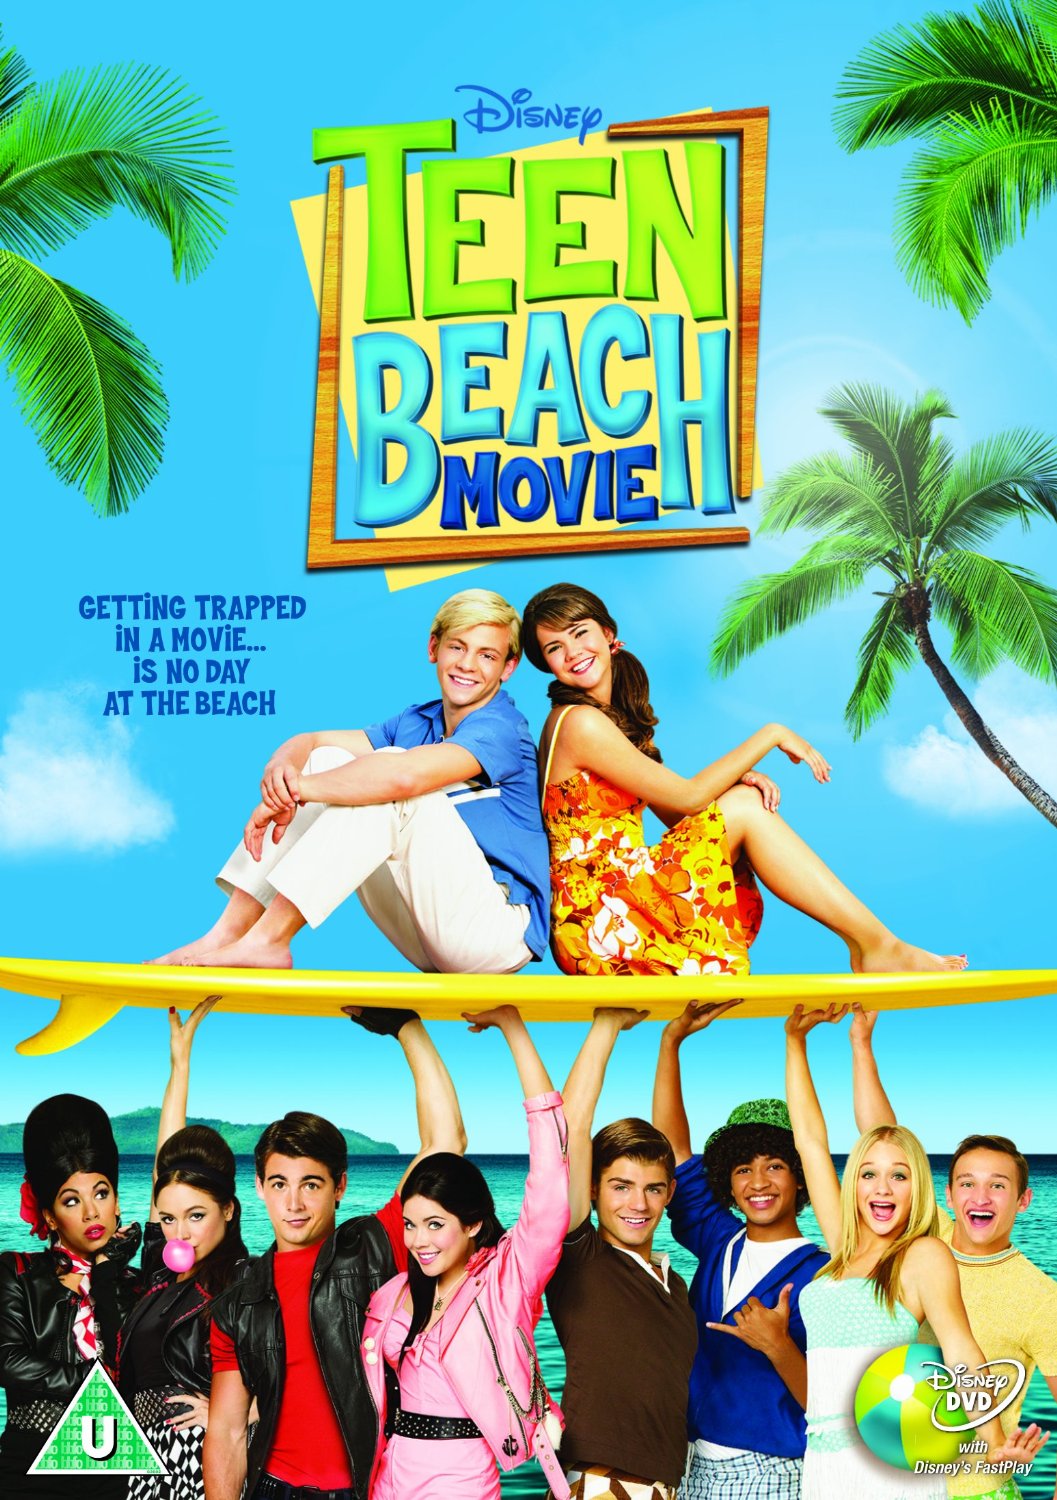 Teen Beach Movie Backgrounds, Compatible - PC, Mobile, Gadgets| 1057x1500 px